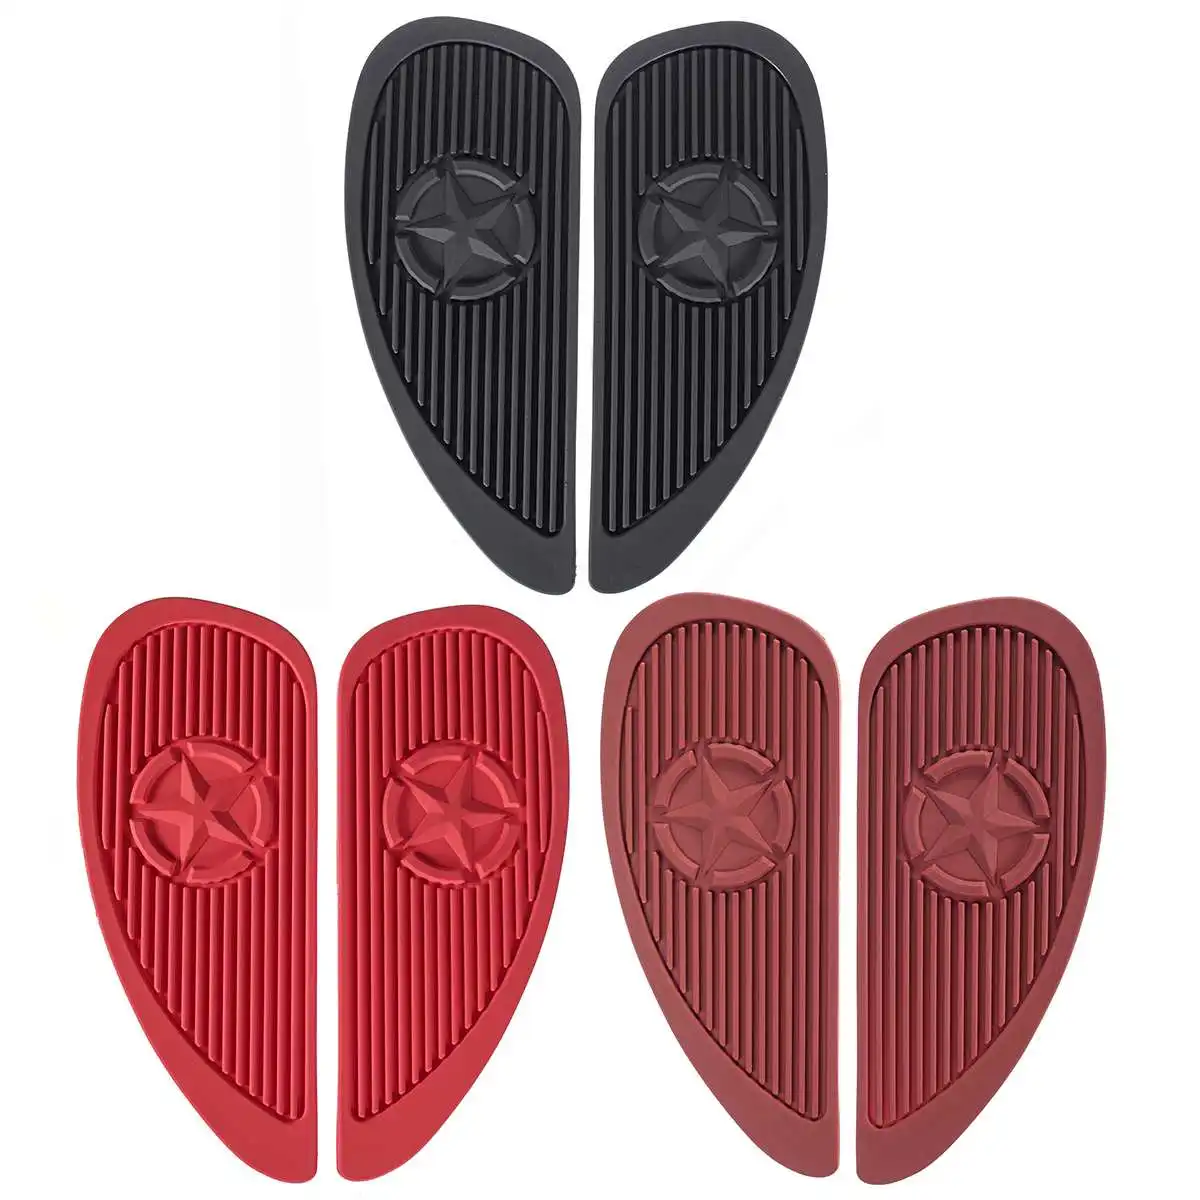 

New 1 Pair Retro Motorcycle Cafe Racer Gas Fuel tank Rubber Stickers Pad Protector Sheath Knee Grip Protector